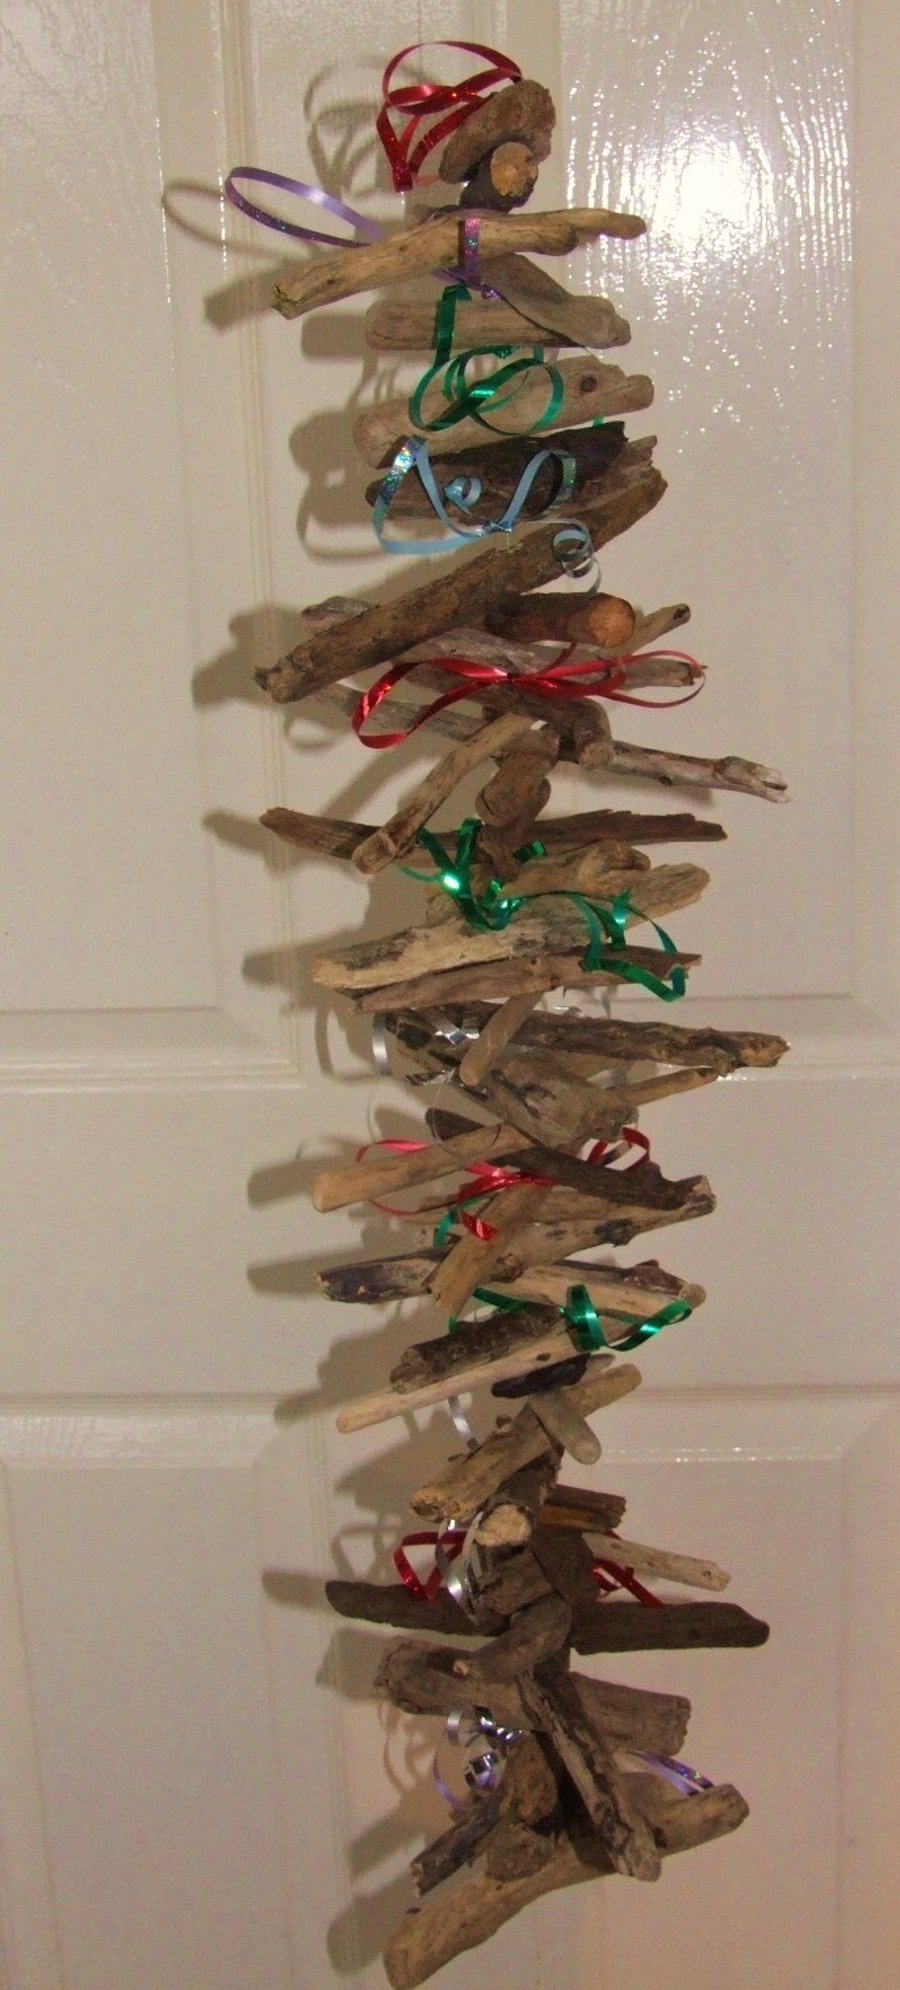 Driftwood wallhanging decoration with tinsel or ribbon for Christmas festivities